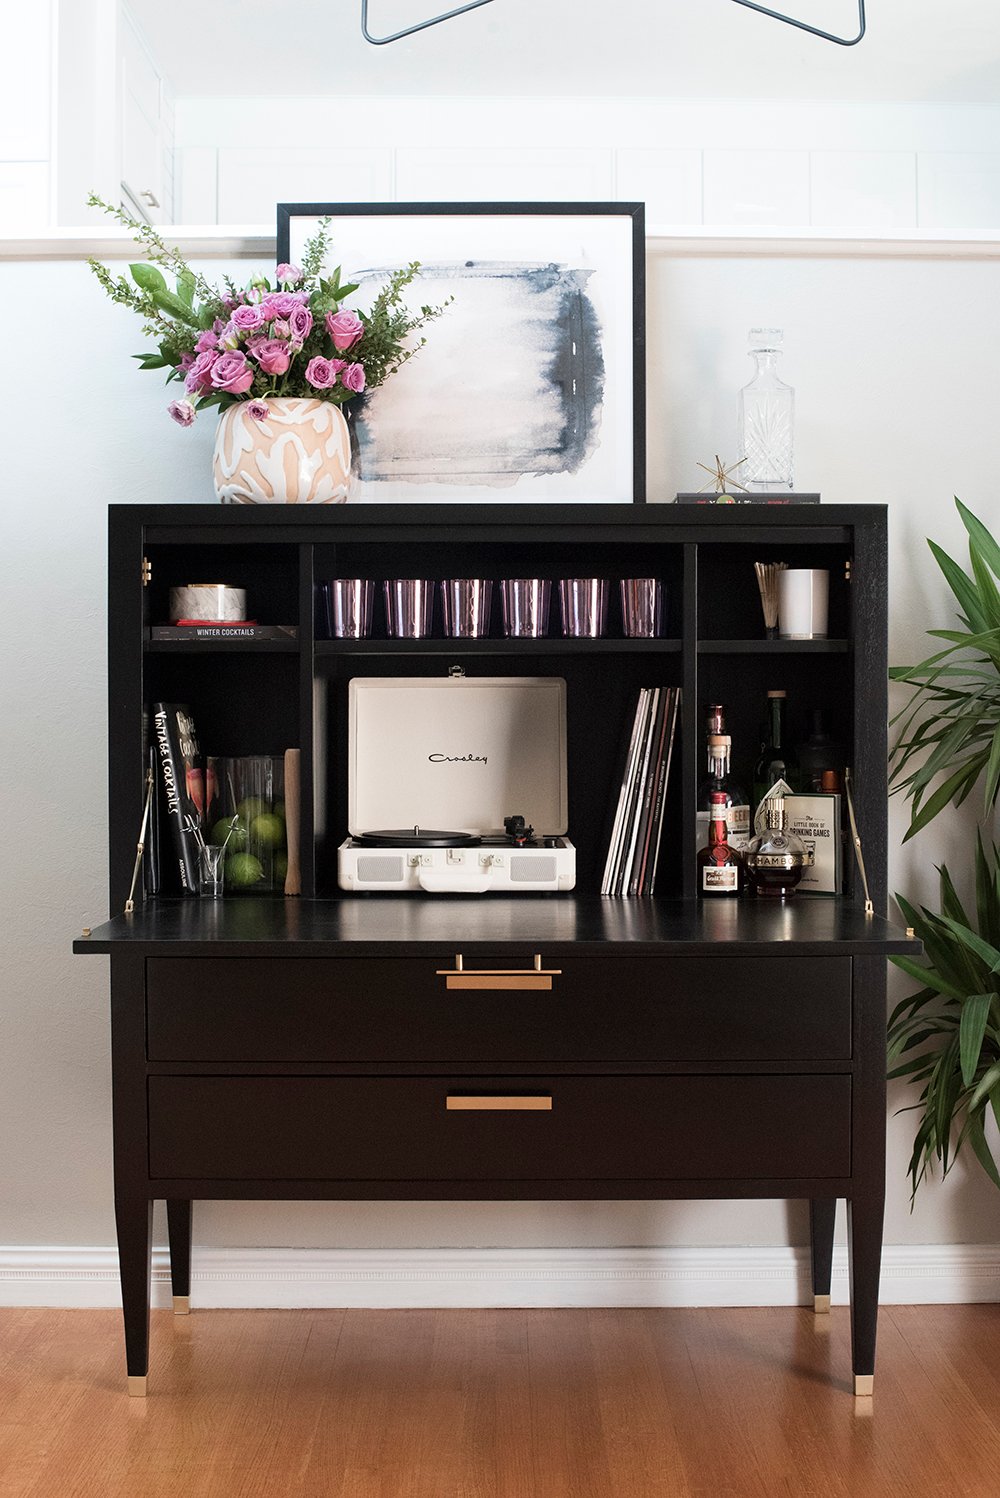 Styling a Glam Bar Cabinet - roomfortuesday.com